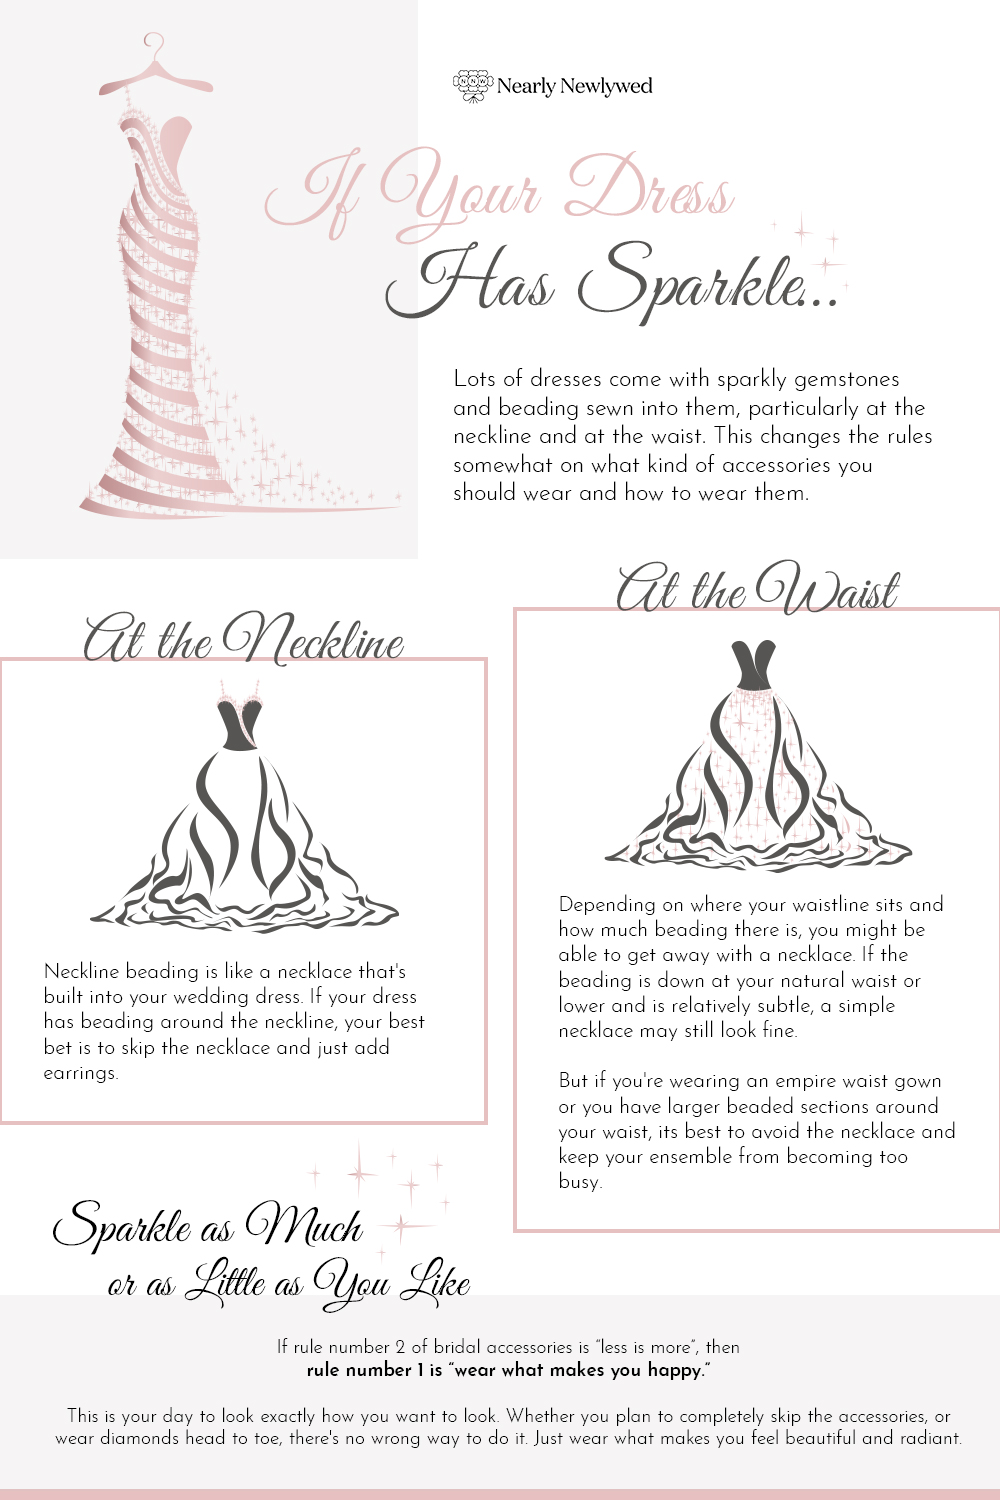 Infographic guiding brides through accessorizing based on the sparkle of their dress